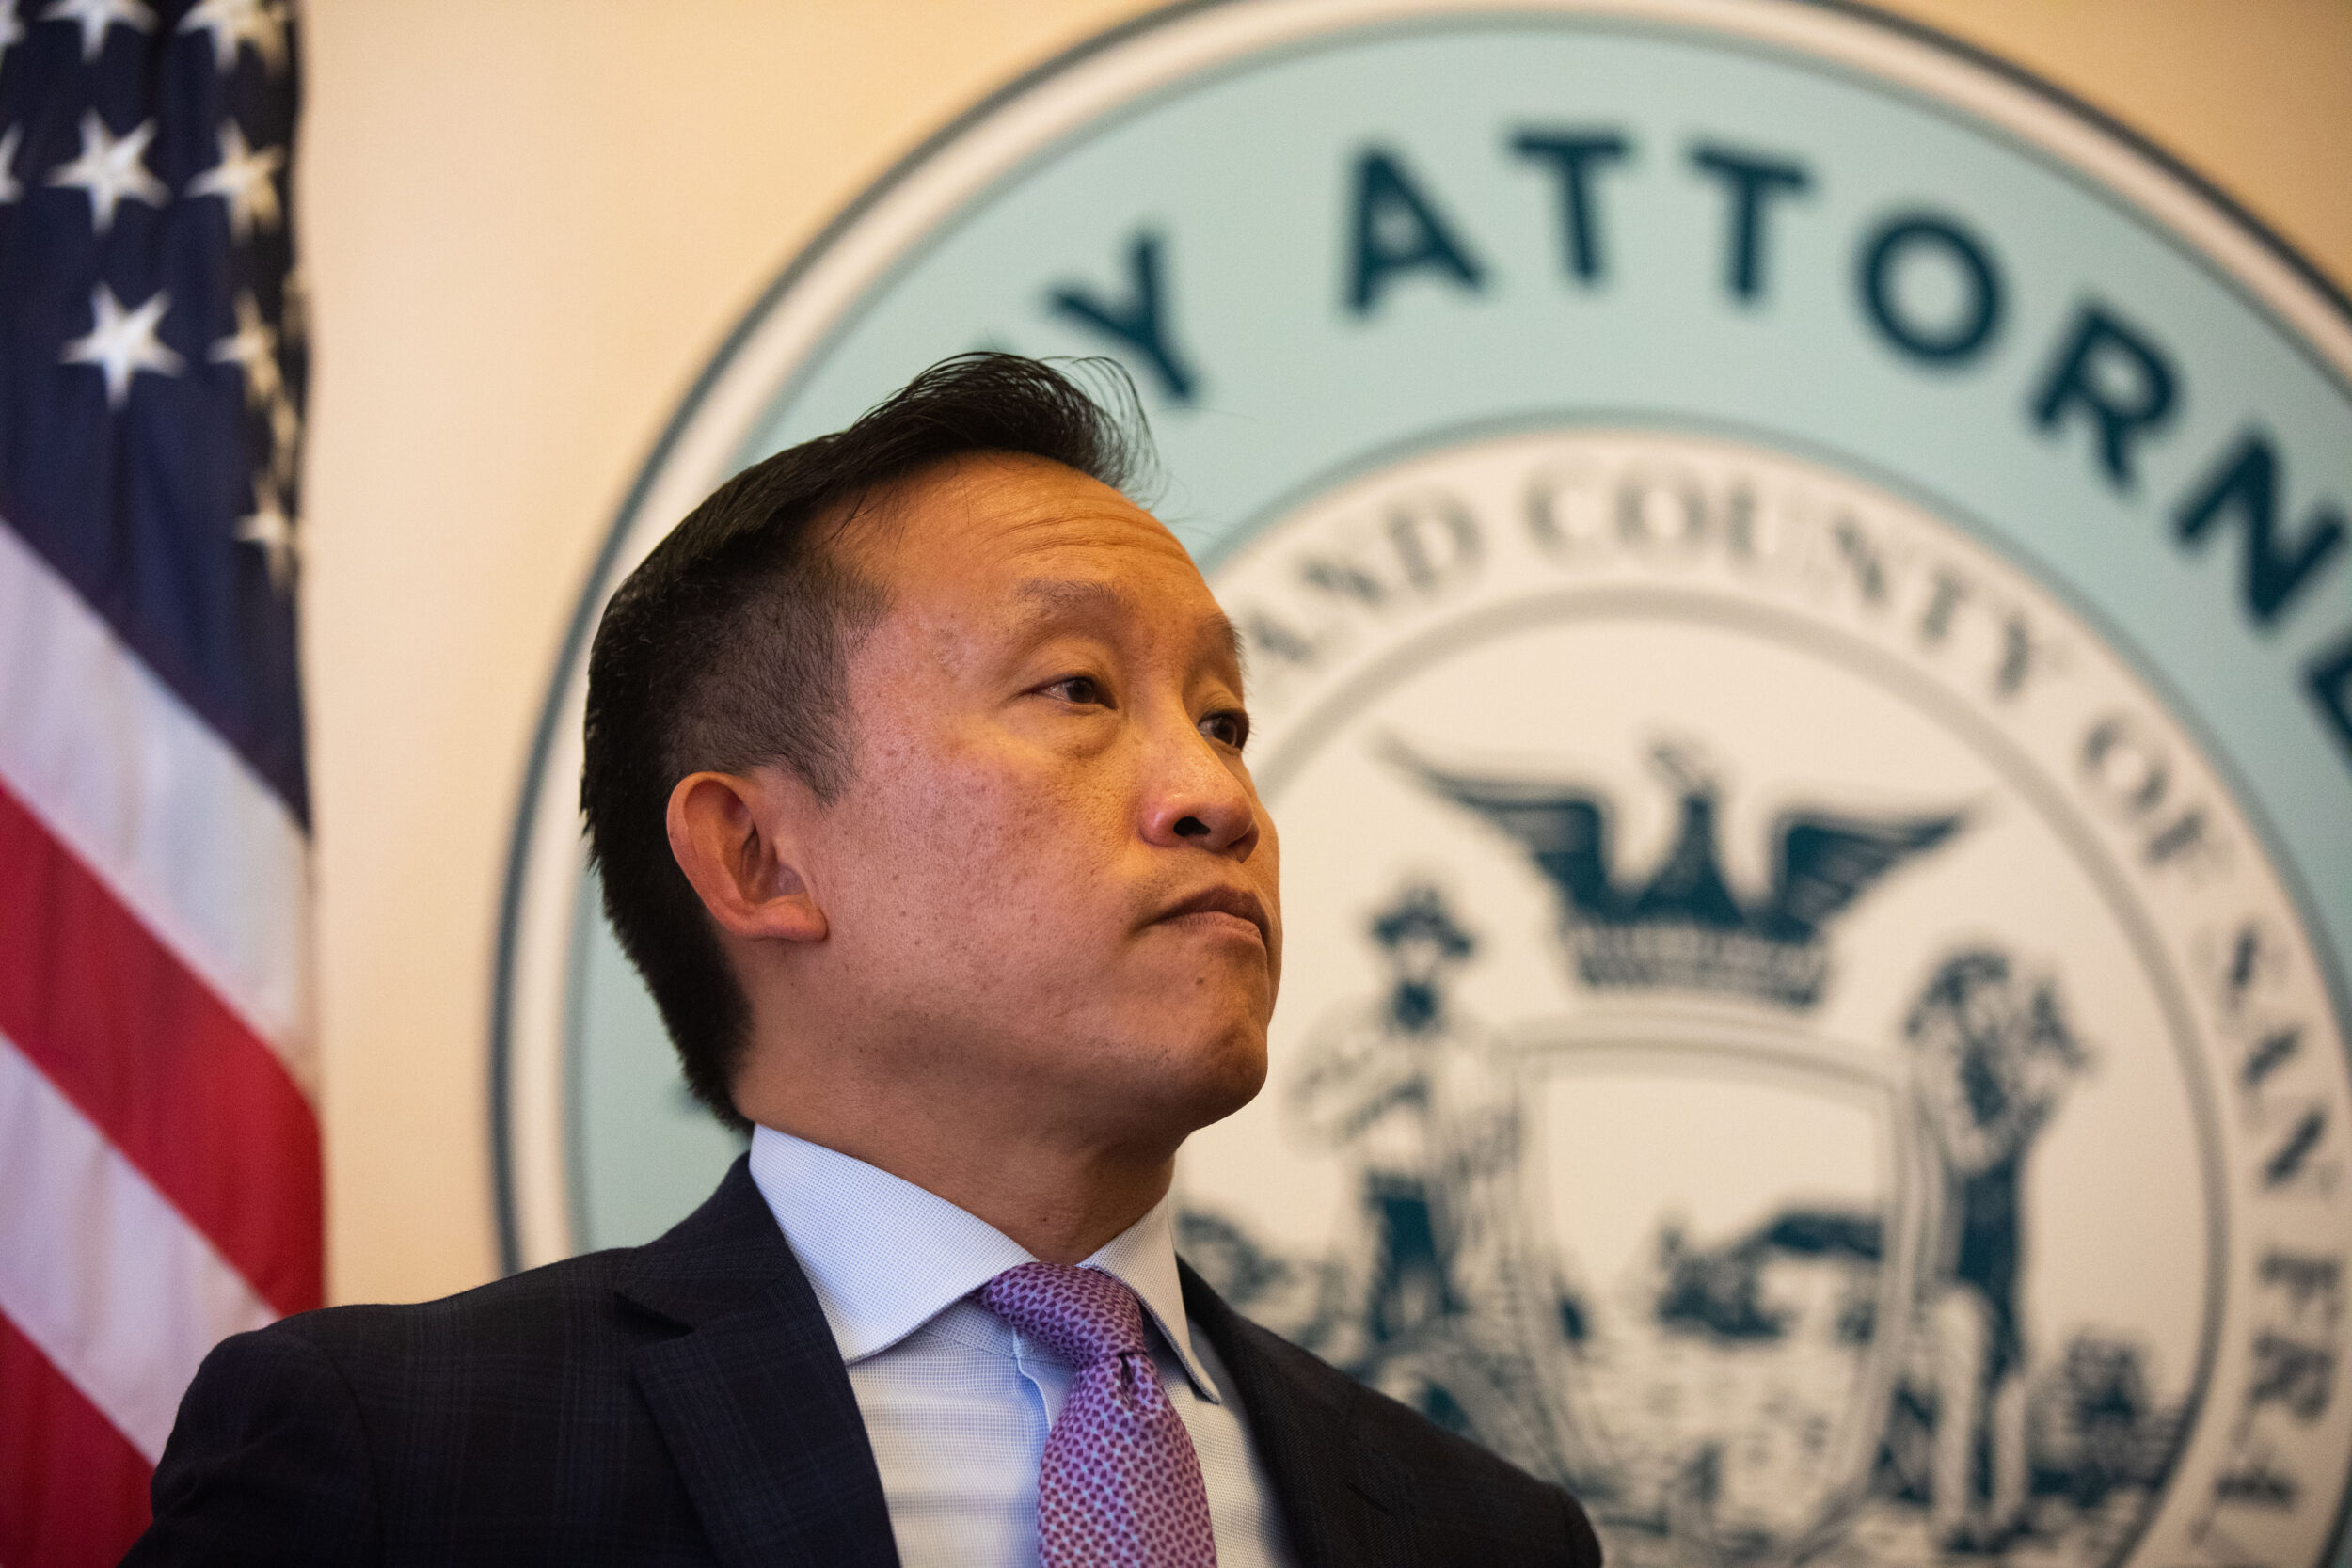 City Attorney David Chiu, wearing a suit and tie, looks on in front of the City Attorney's official seal and an American flag.